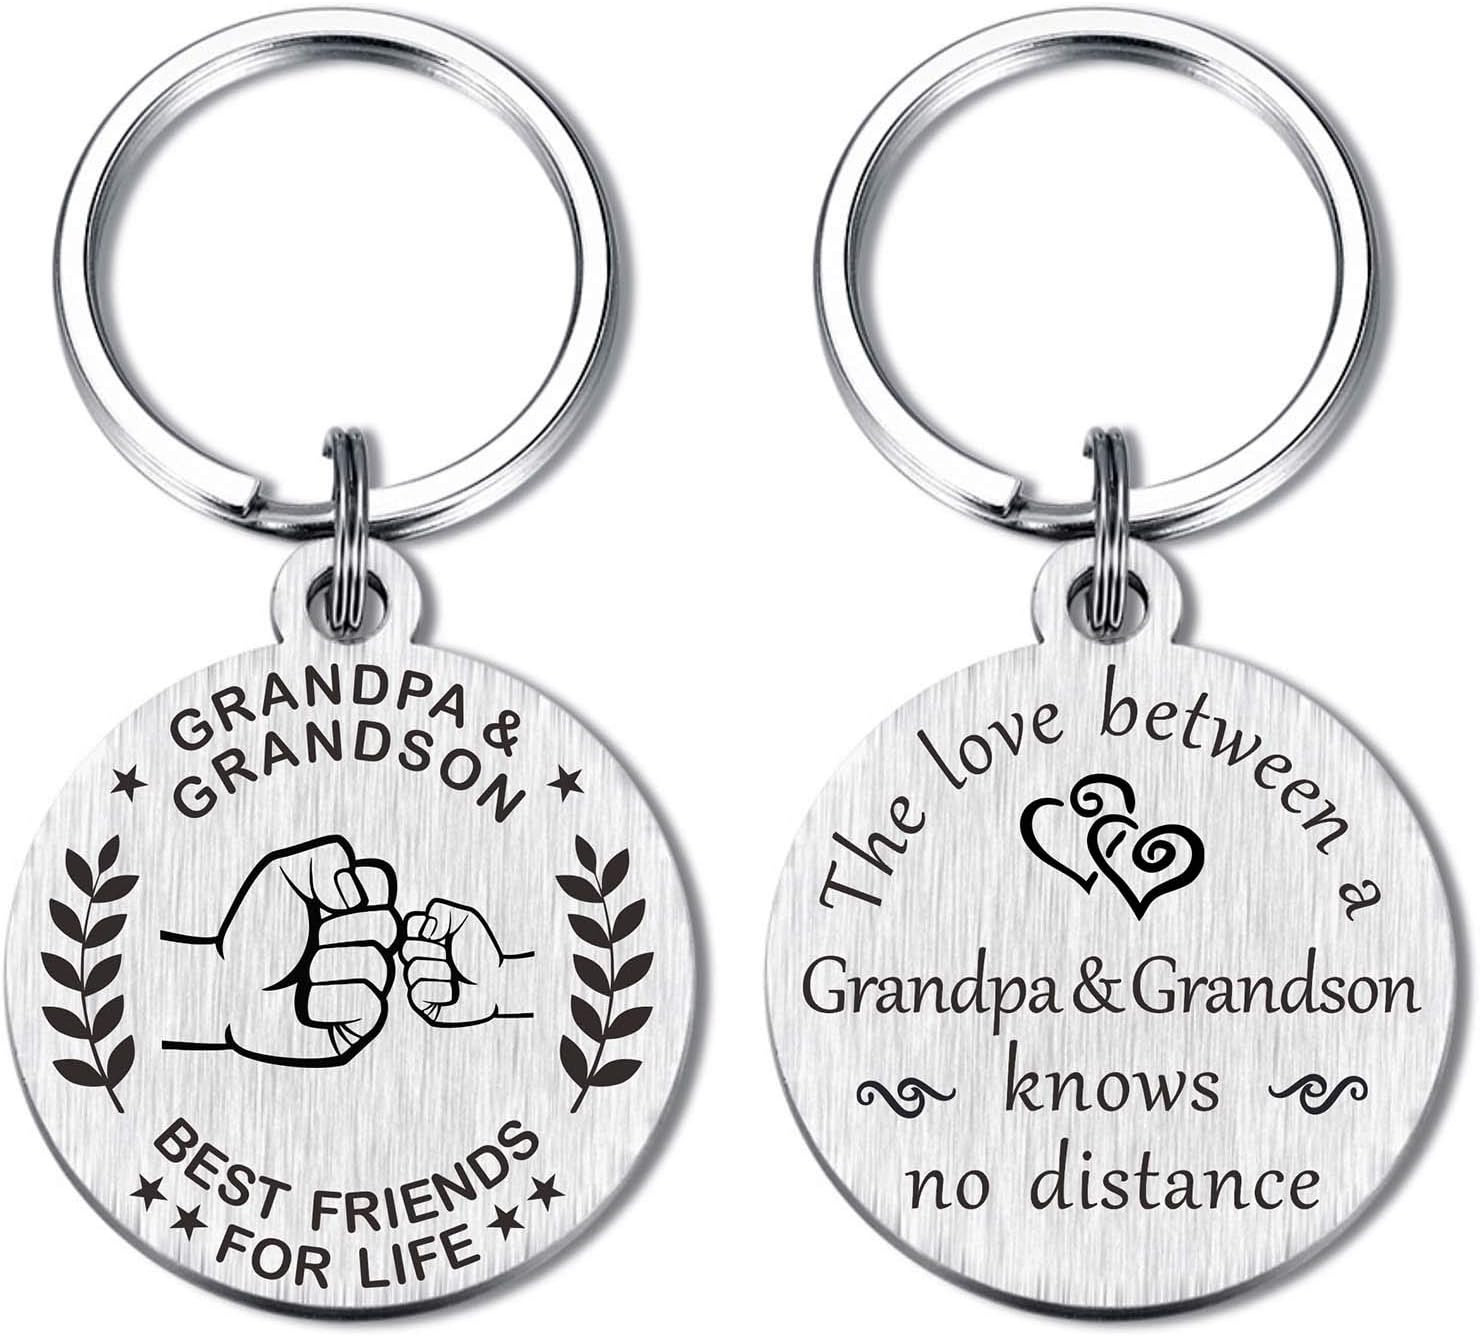 Grandpa Gifts - Grandfather and Grandson Granddaughter Keychain